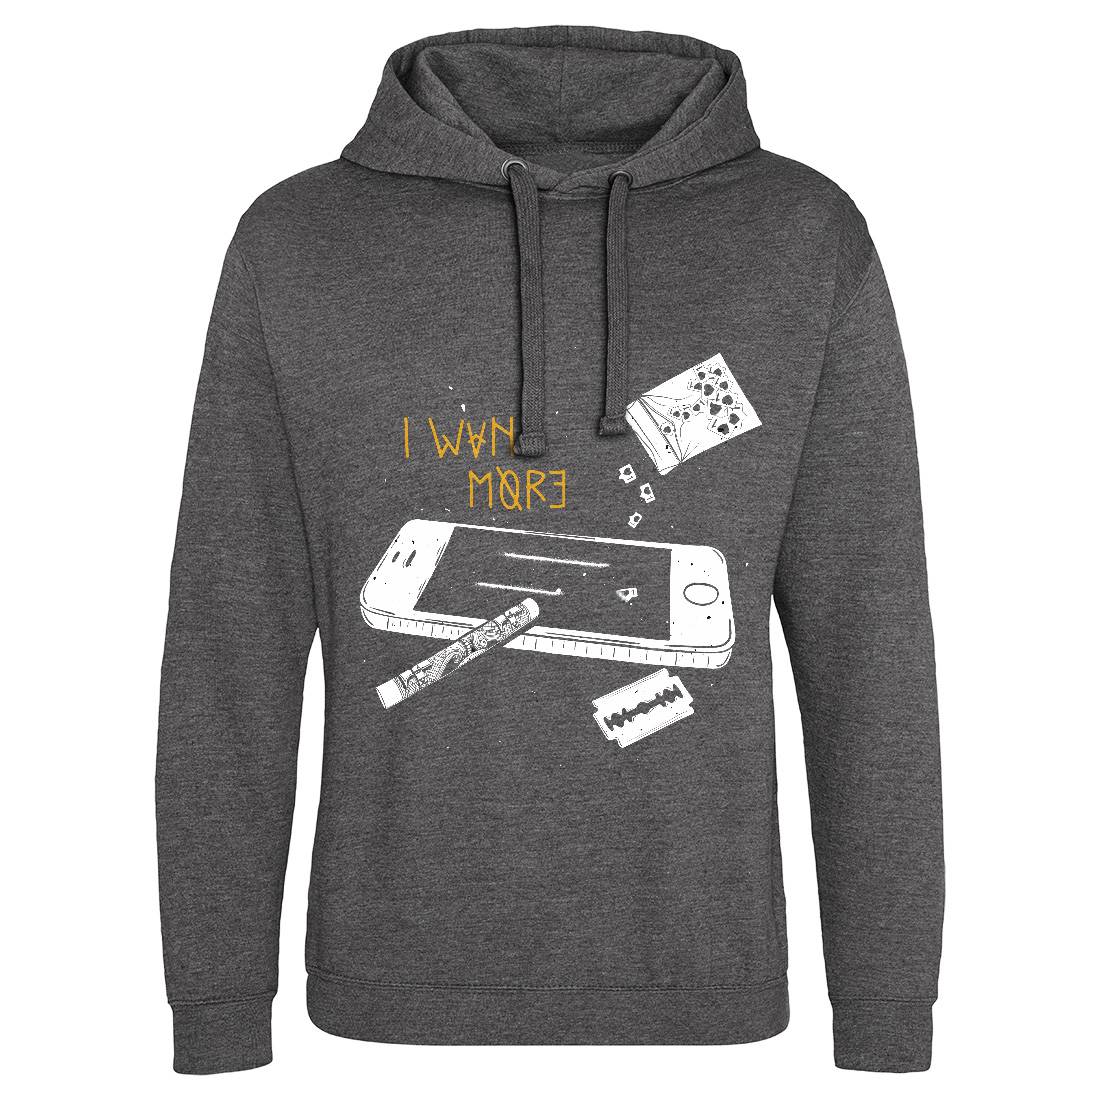 I Want More Mens Hoodie Without Pocket Media D465